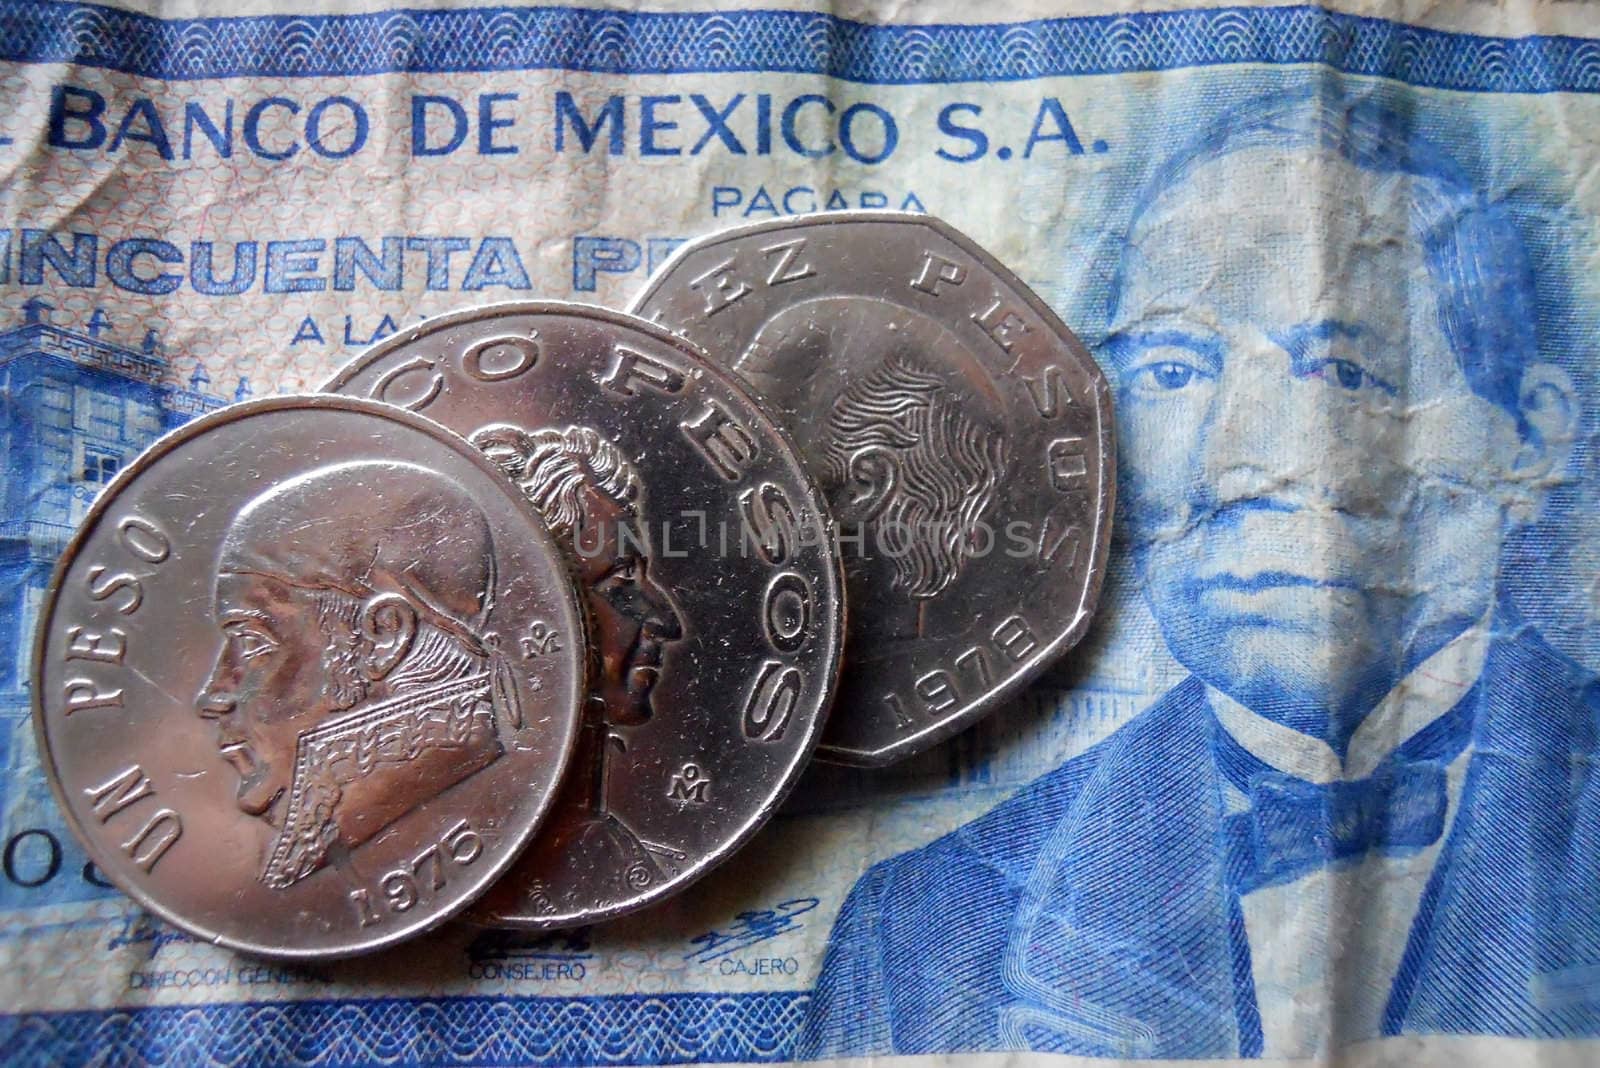           mexican money 3 peso coins and a centavo bill in excellent condition